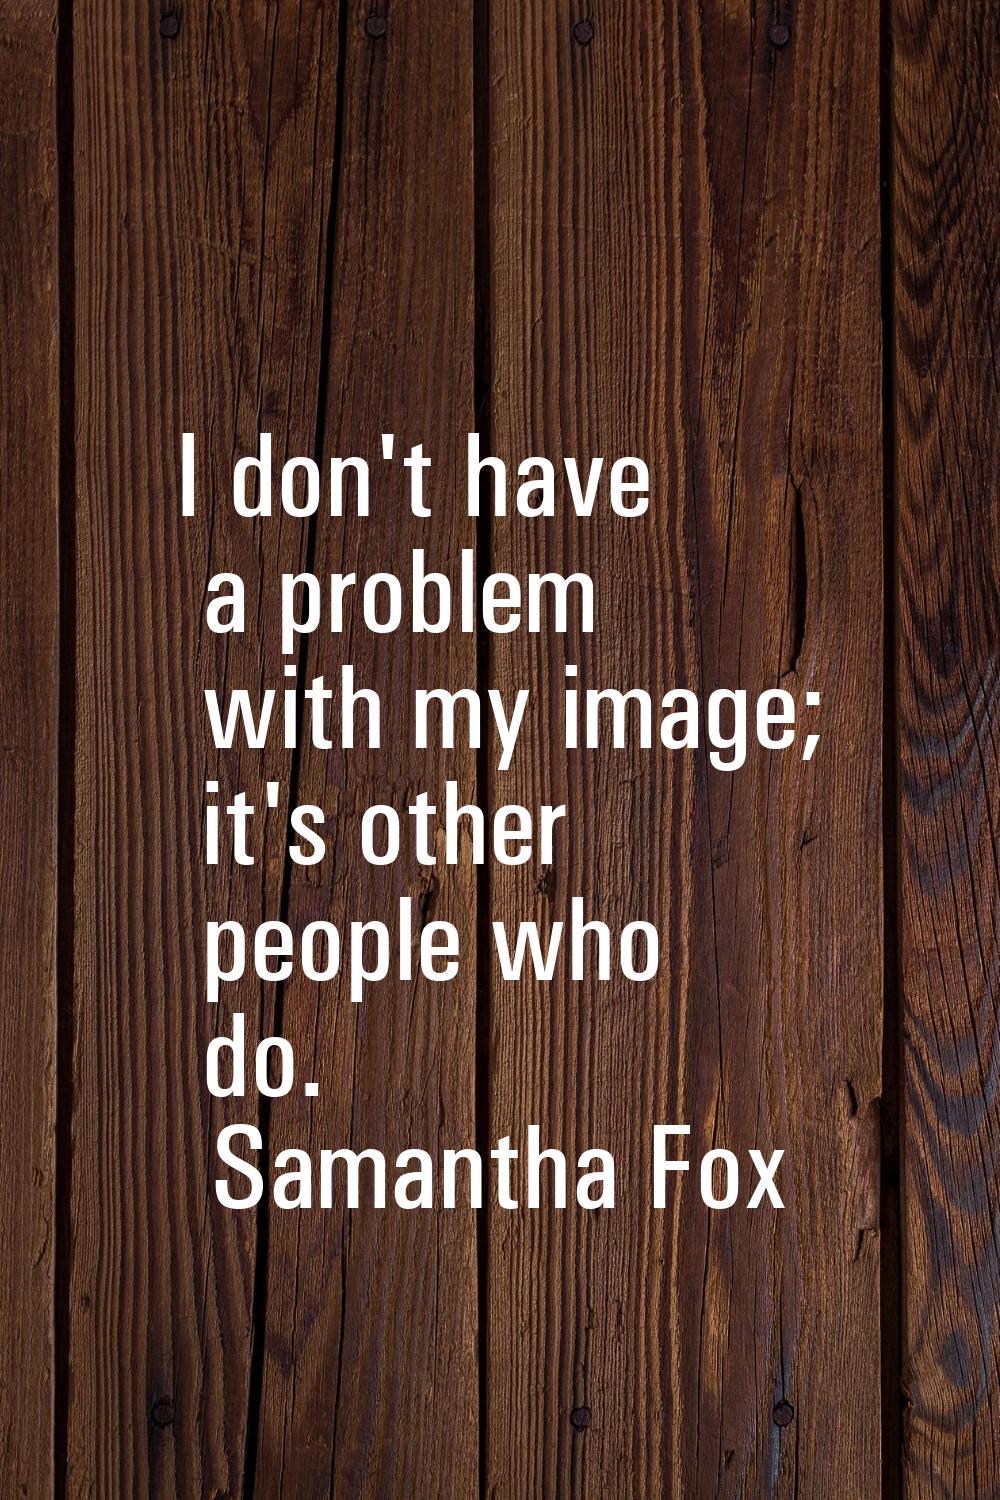 I don't have a problem with my image; it's other people who do.